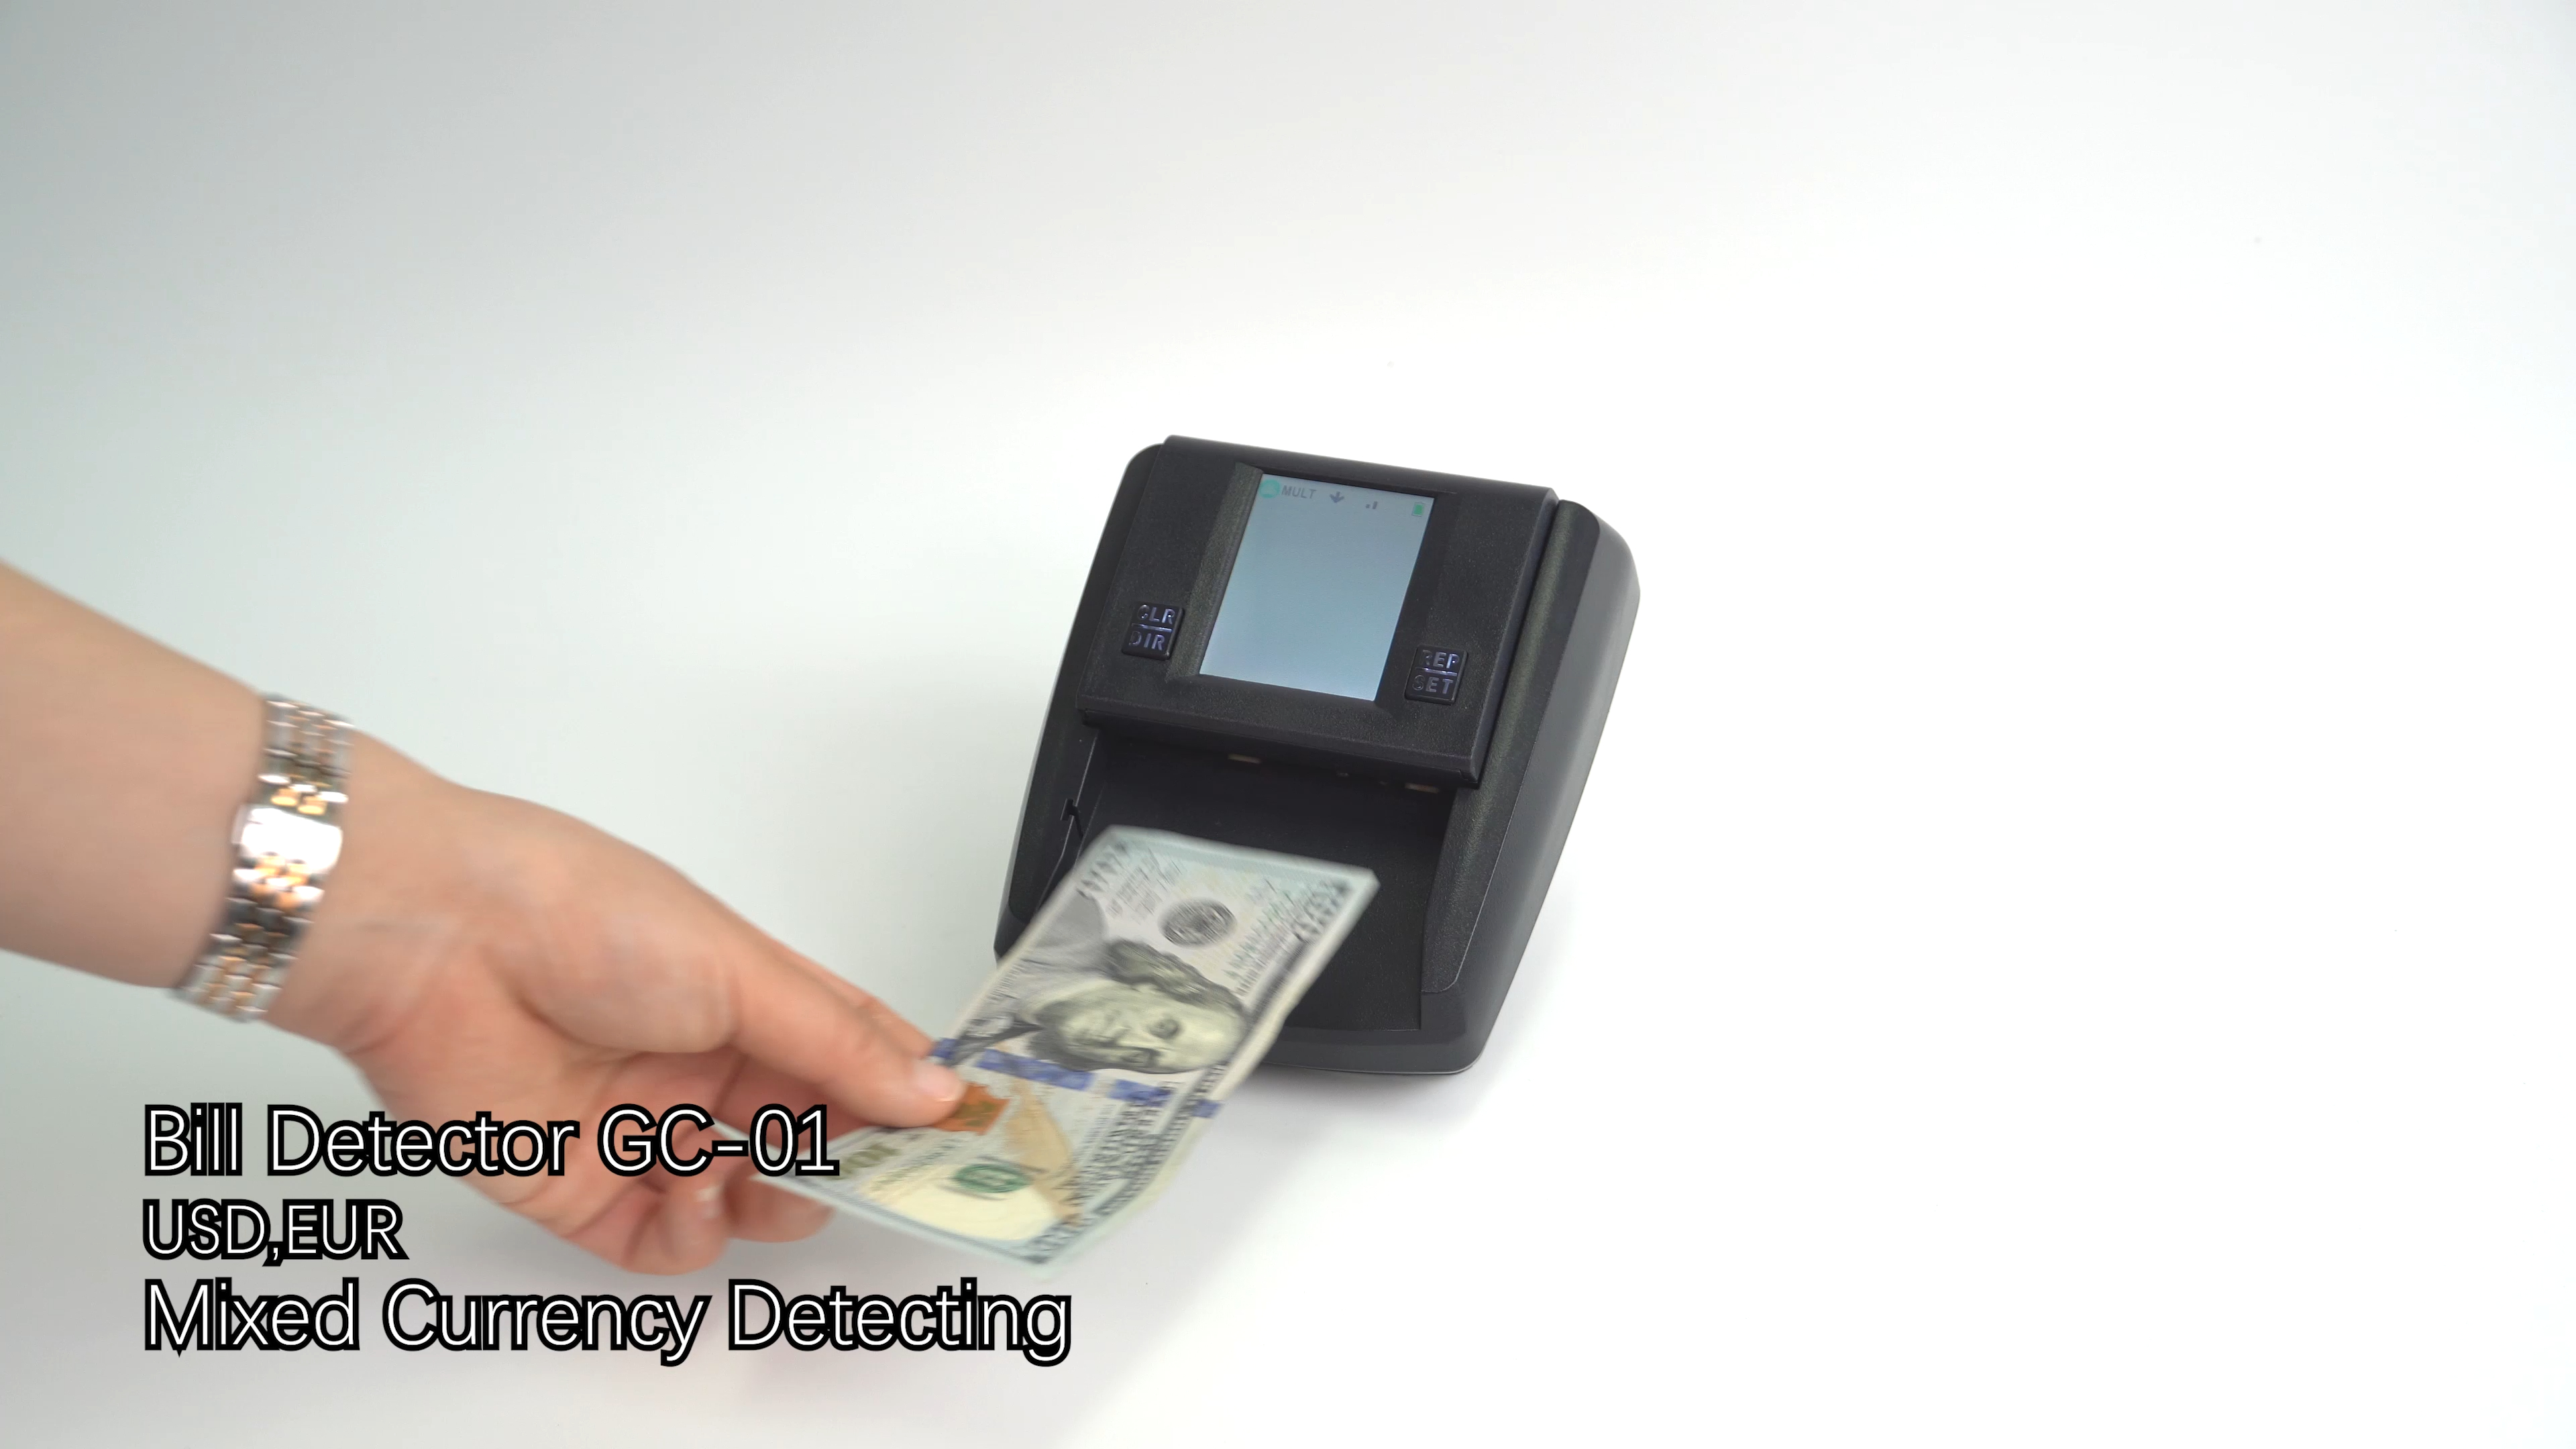 Mixed Currency Detecting